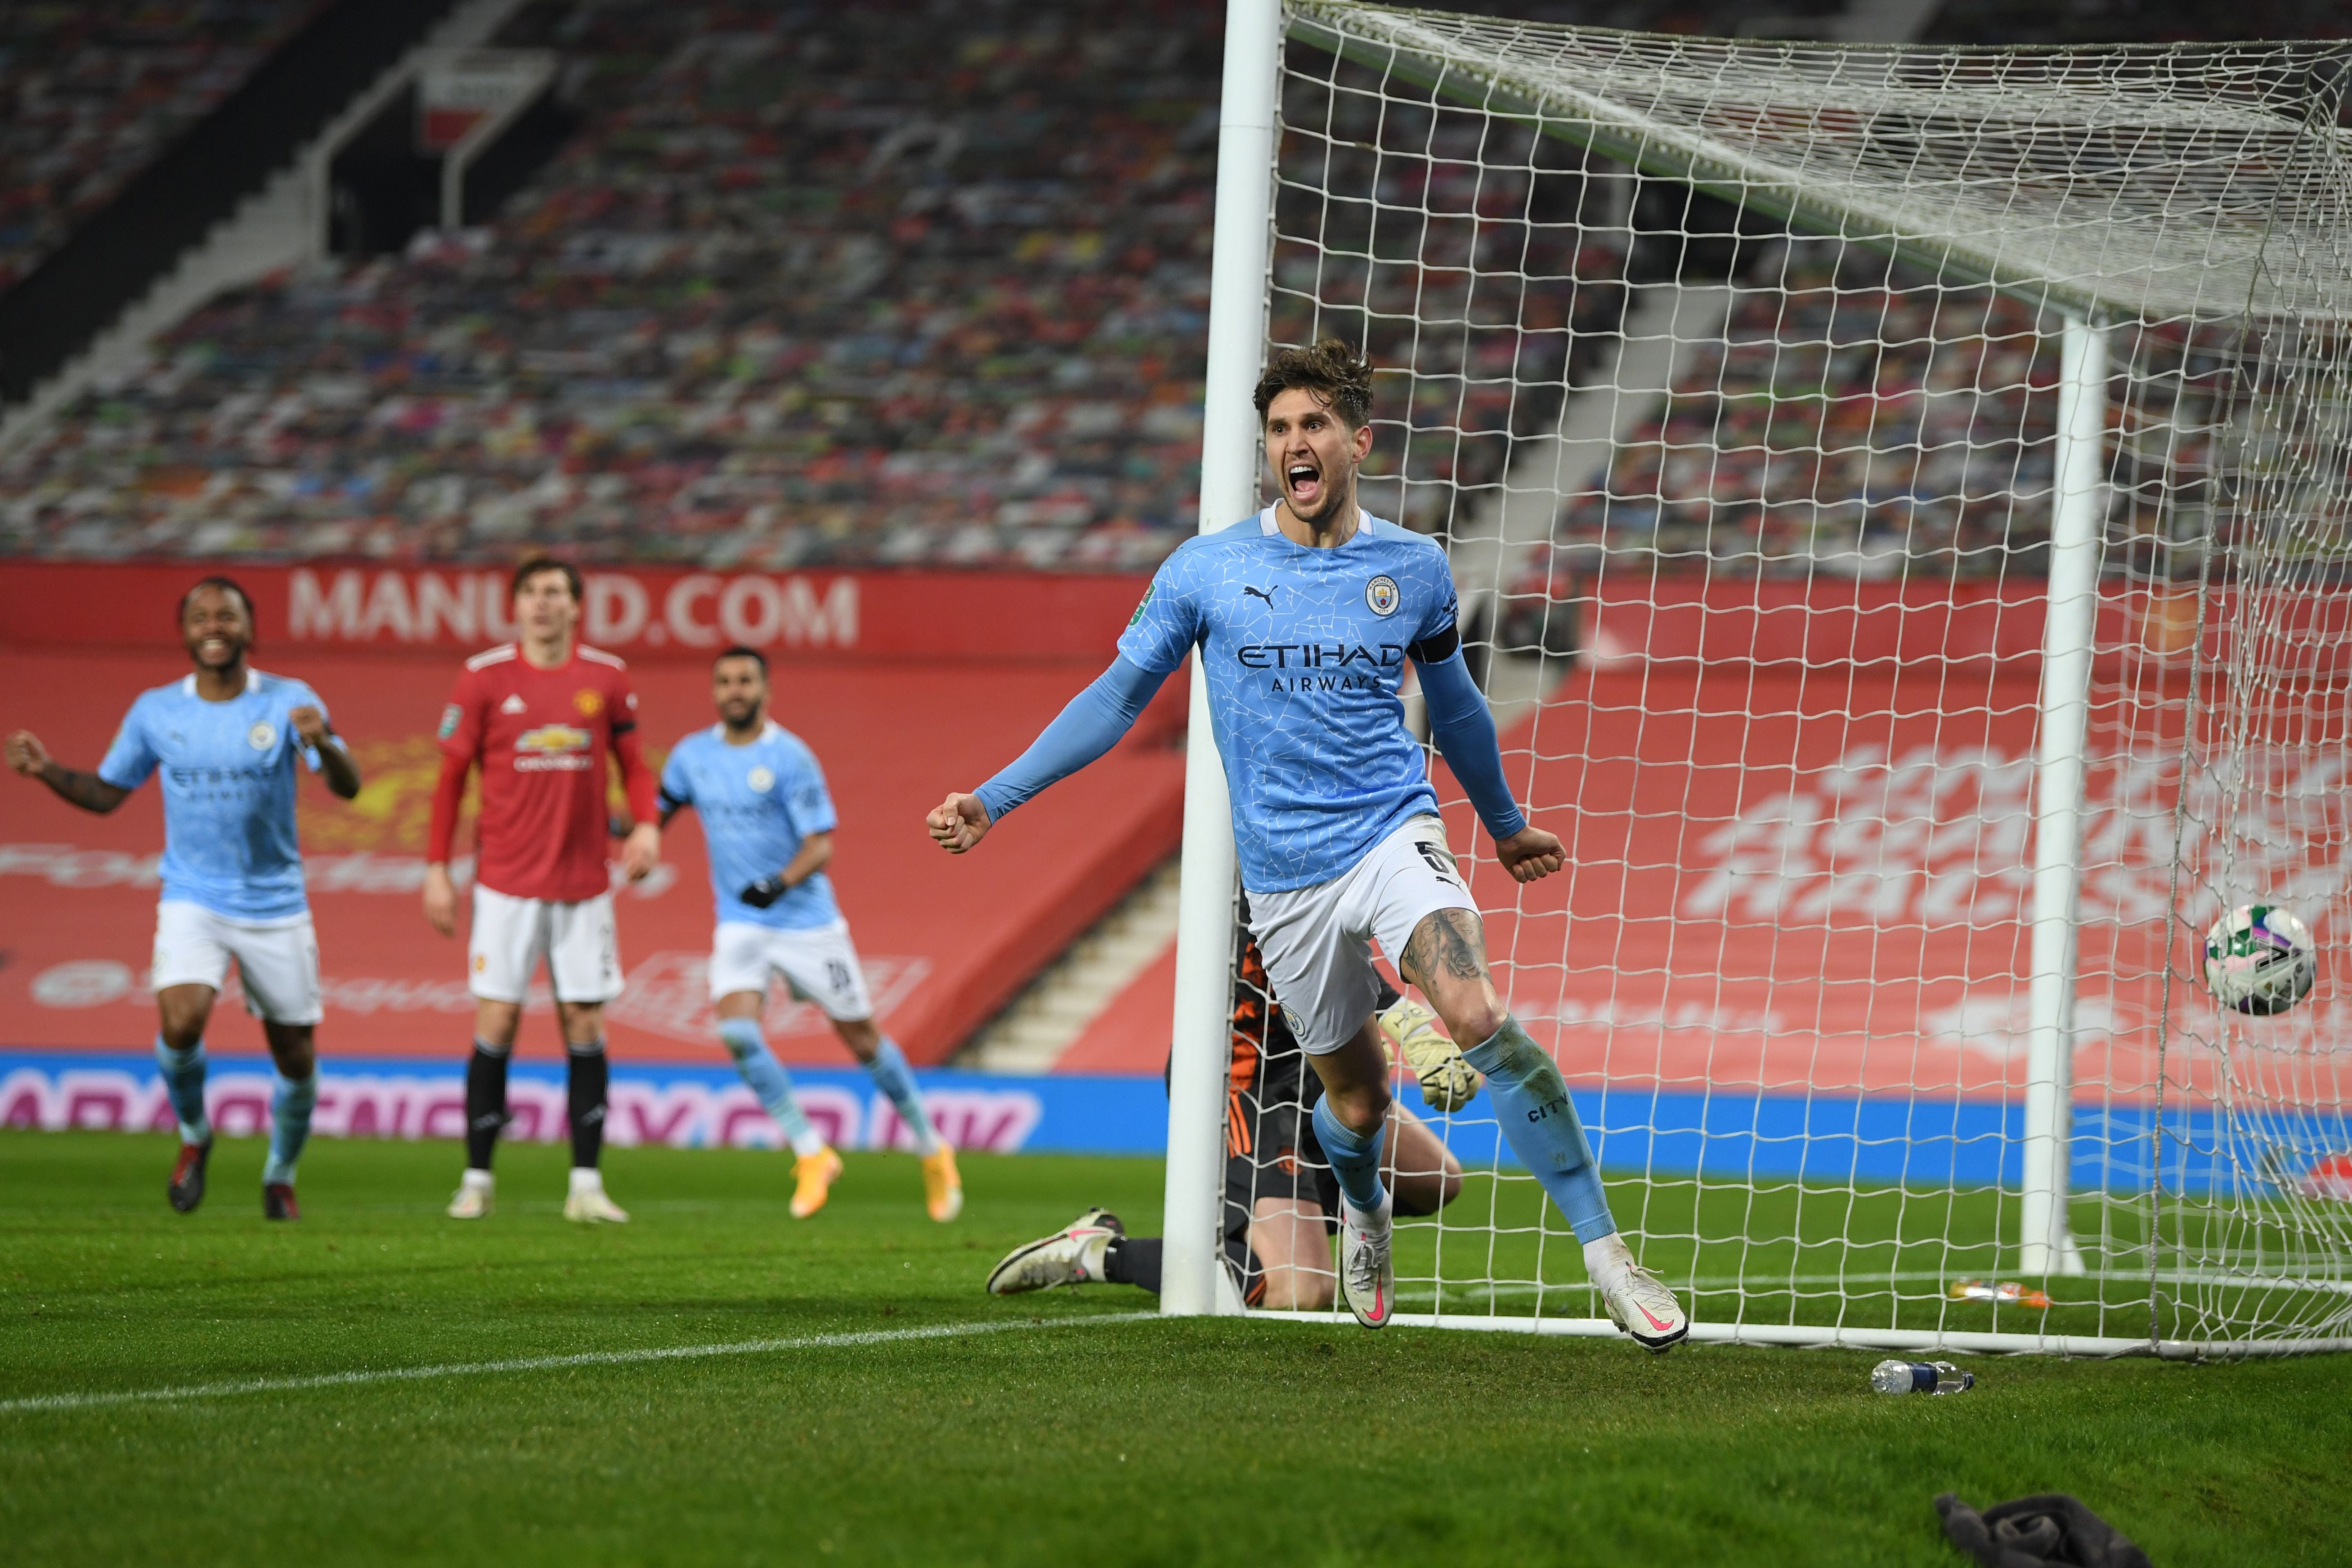 John Stones scored his first Man City goal in over three years